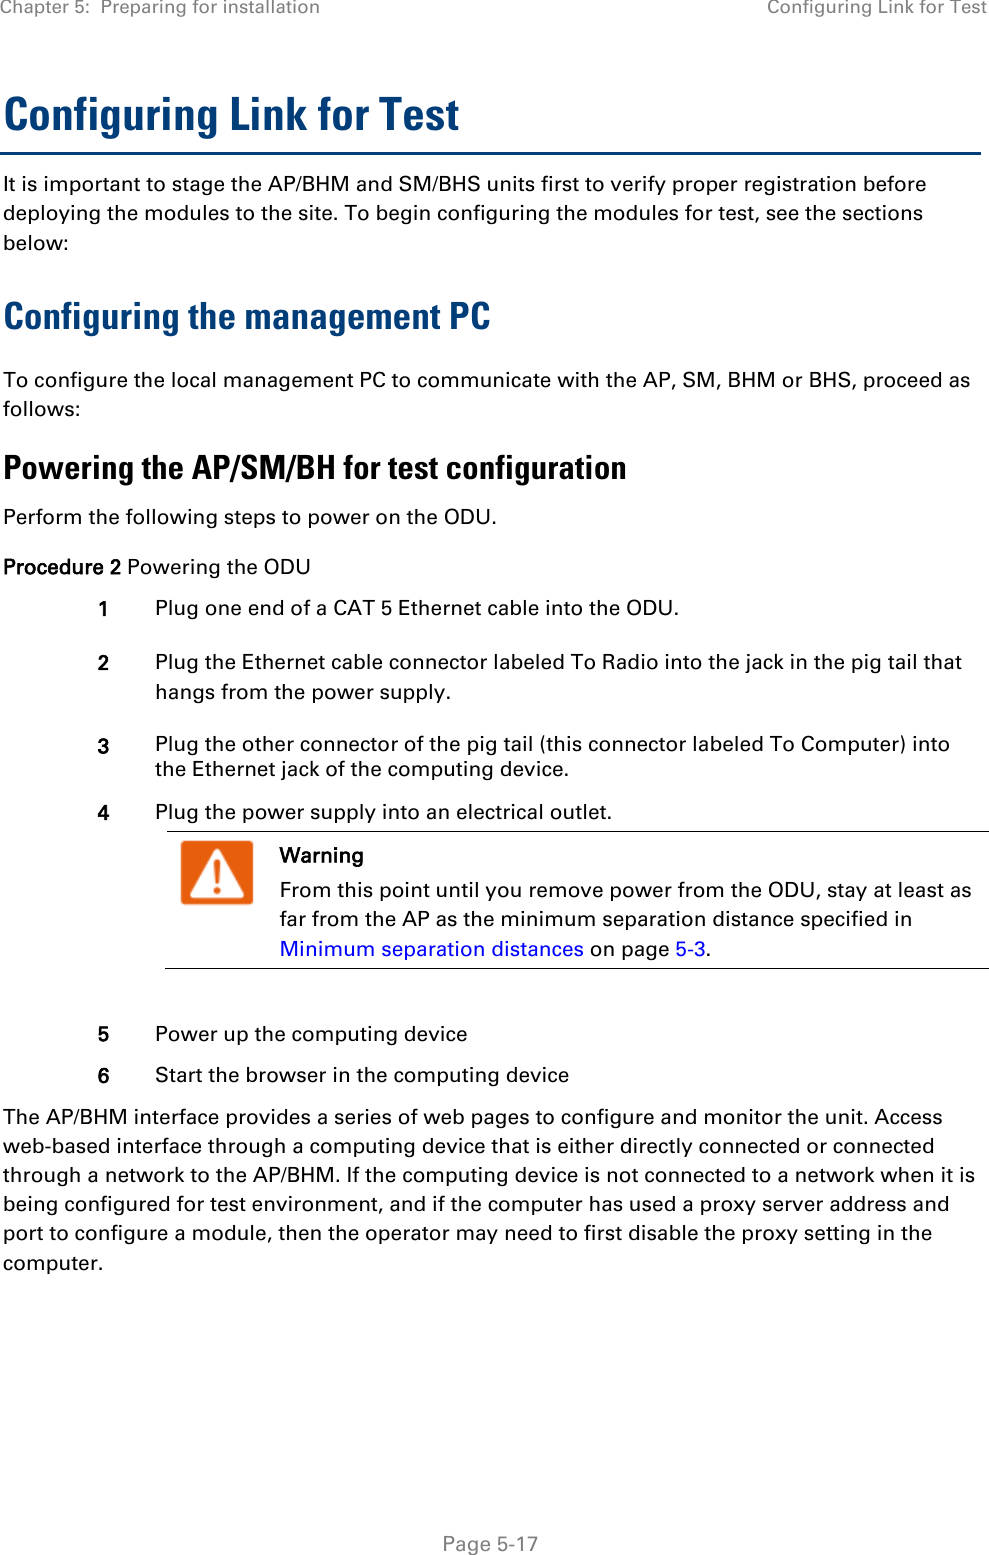 Chapter 5:  Preparing for installation Configuring Link for Test   Page 5-17 Configuring Link for Test It is important to stage the AP/BHM and SM/BHS units first to verify proper registration before deploying the modules to the site. To begin configuring the modules for test, see the sections below: Configuring the management PC To configure the local management PC to communicate with the AP, SM, BHM or BHS, proceed as follows: Powering the AP/SM/BH for test configuration Perform the following steps to power on the ODU. Procedure 2 Powering the ODU 1 Plug one end of a CAT 5 Ethernet cable into the ODU. 2 Plug the Ethernet cable connector labeled To Radio into the jack in the pig tail that hangs from the power supply. 3 Plug the other connector of the pig tail (this connector labeled To Computer) into the Ethernet jack of the computing device. 4 Plug the power supply into an electrical outlet.  Warning From this point until you remove power from the ODU, stay at least as far from the AP as the minimum separation distance specified in Minimum separation distances on page 5-3.   5 Power up the computing device 6 Start the browser in the computing device The AP/BHM interface provides a series of web pages to configure and monitor the unit. Access web-based interface through a computing device that is either directly connected or connected through a network to the AP/BHM. If the computing device is not connected to a network when it is being configured for test environment, and if the computer has used a proxy server address and port to configure a module, then the operator may need to first disable the proxy setting in the computer.      